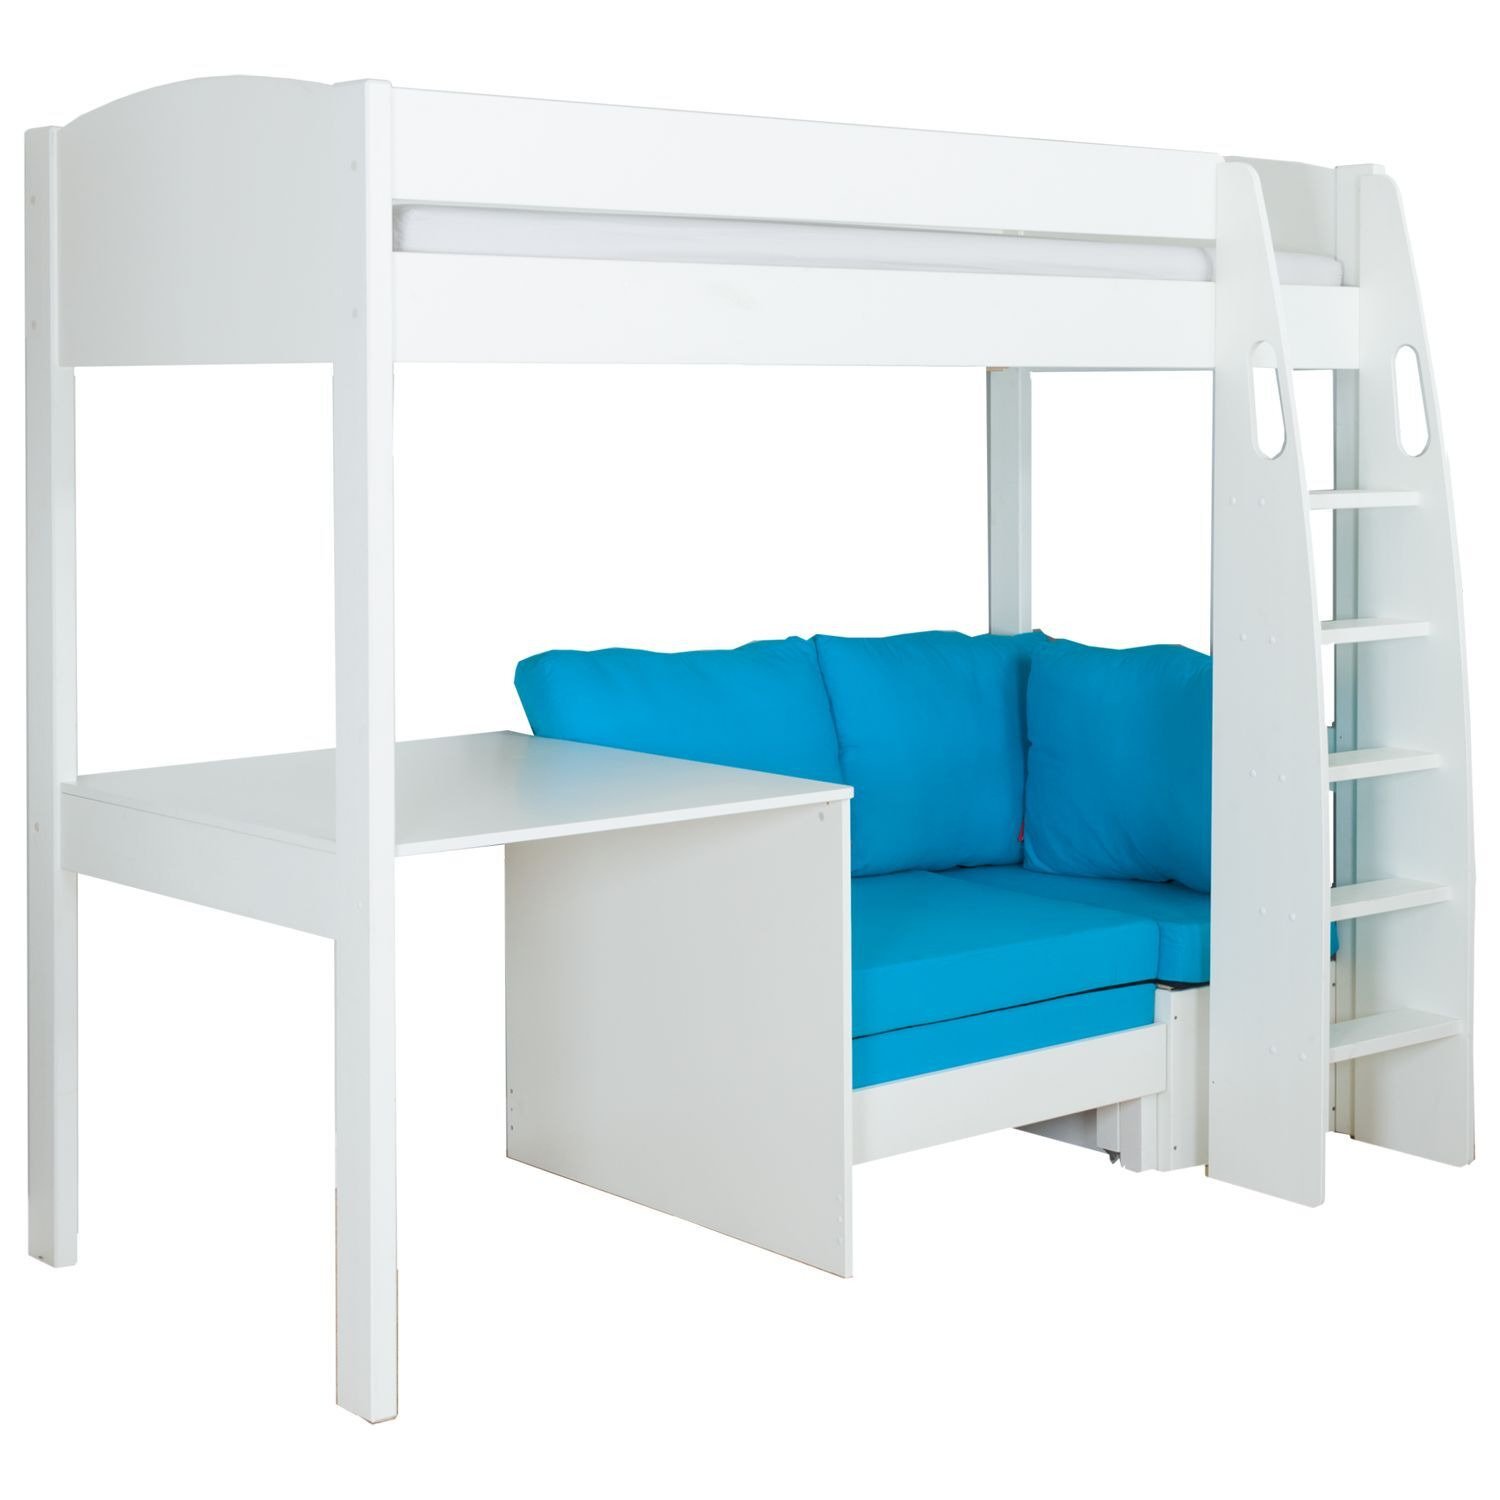 Stompa Uno S Plus High-Sleeper Bed with Fixed Desk and Chair Bed - image 1